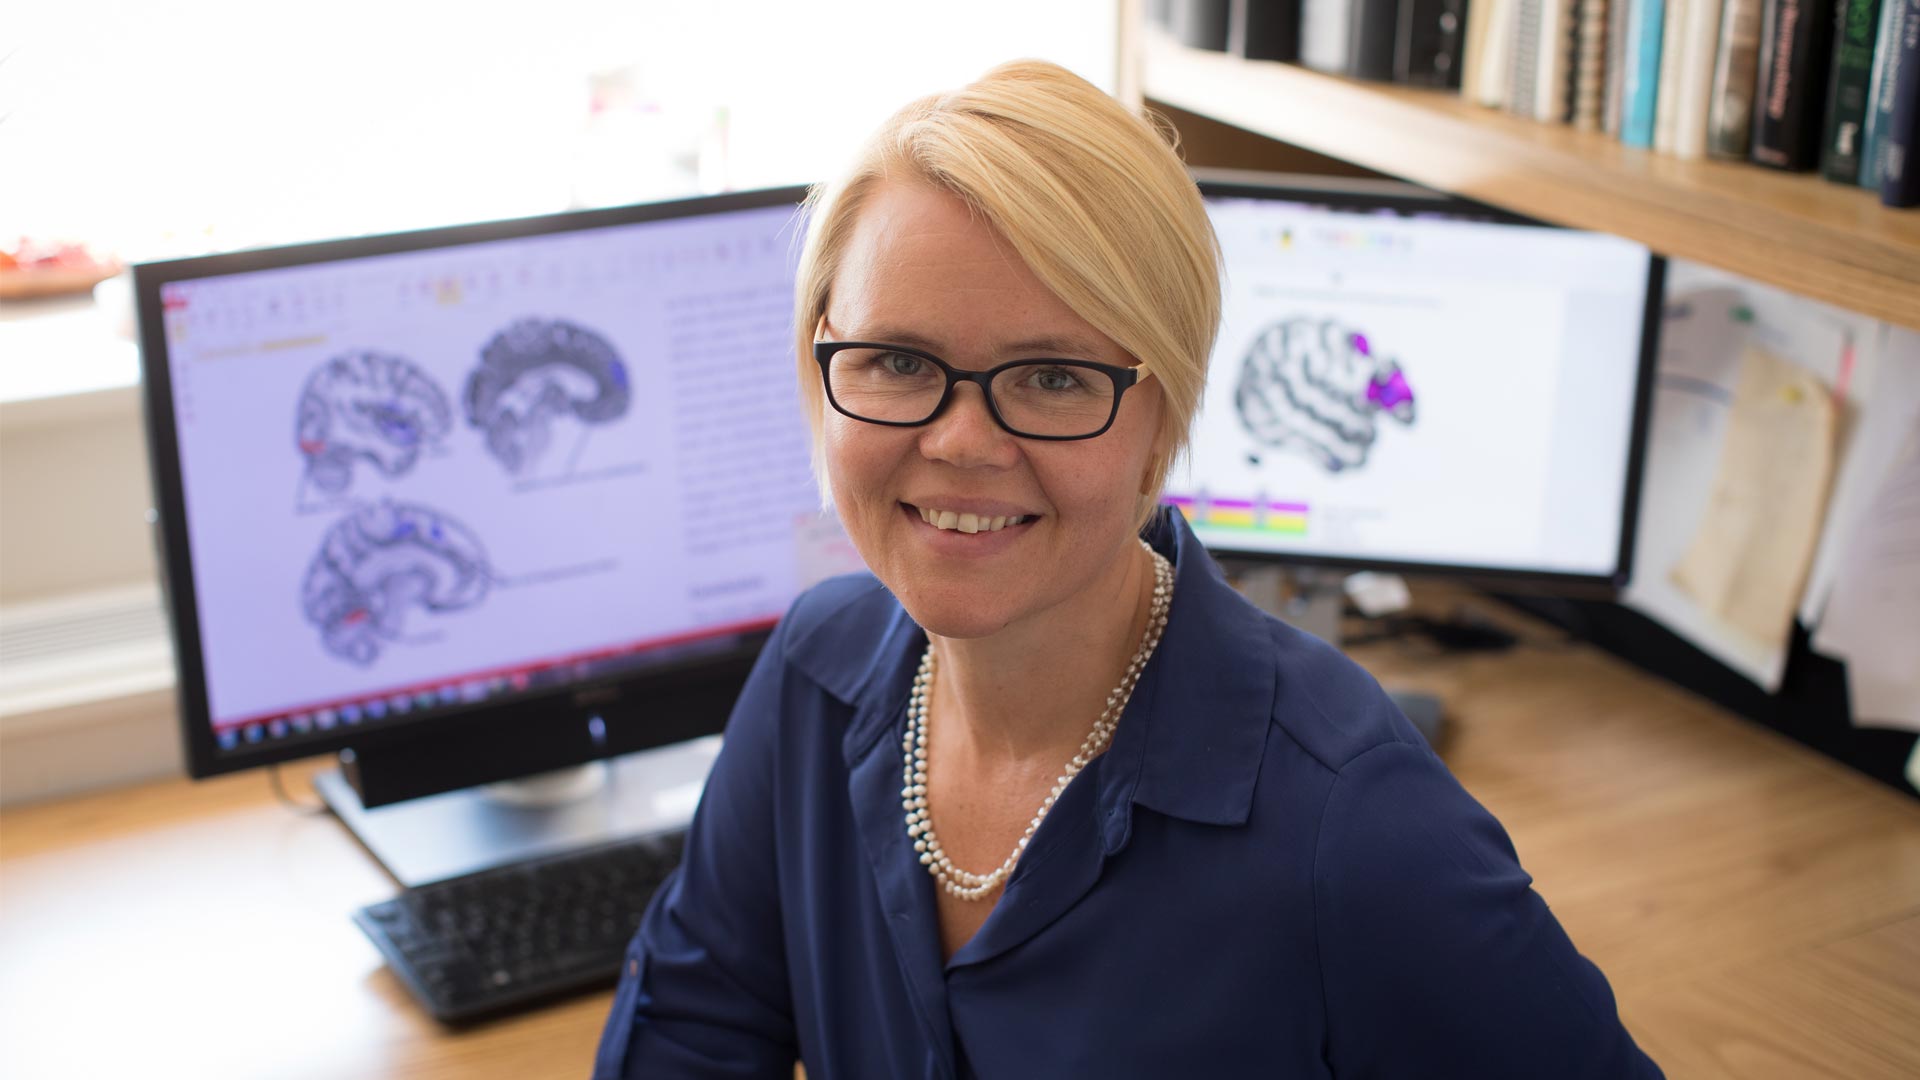 Einstein Researcher Awarded $3.5 Million Grant to Study Brain Changes During Aging